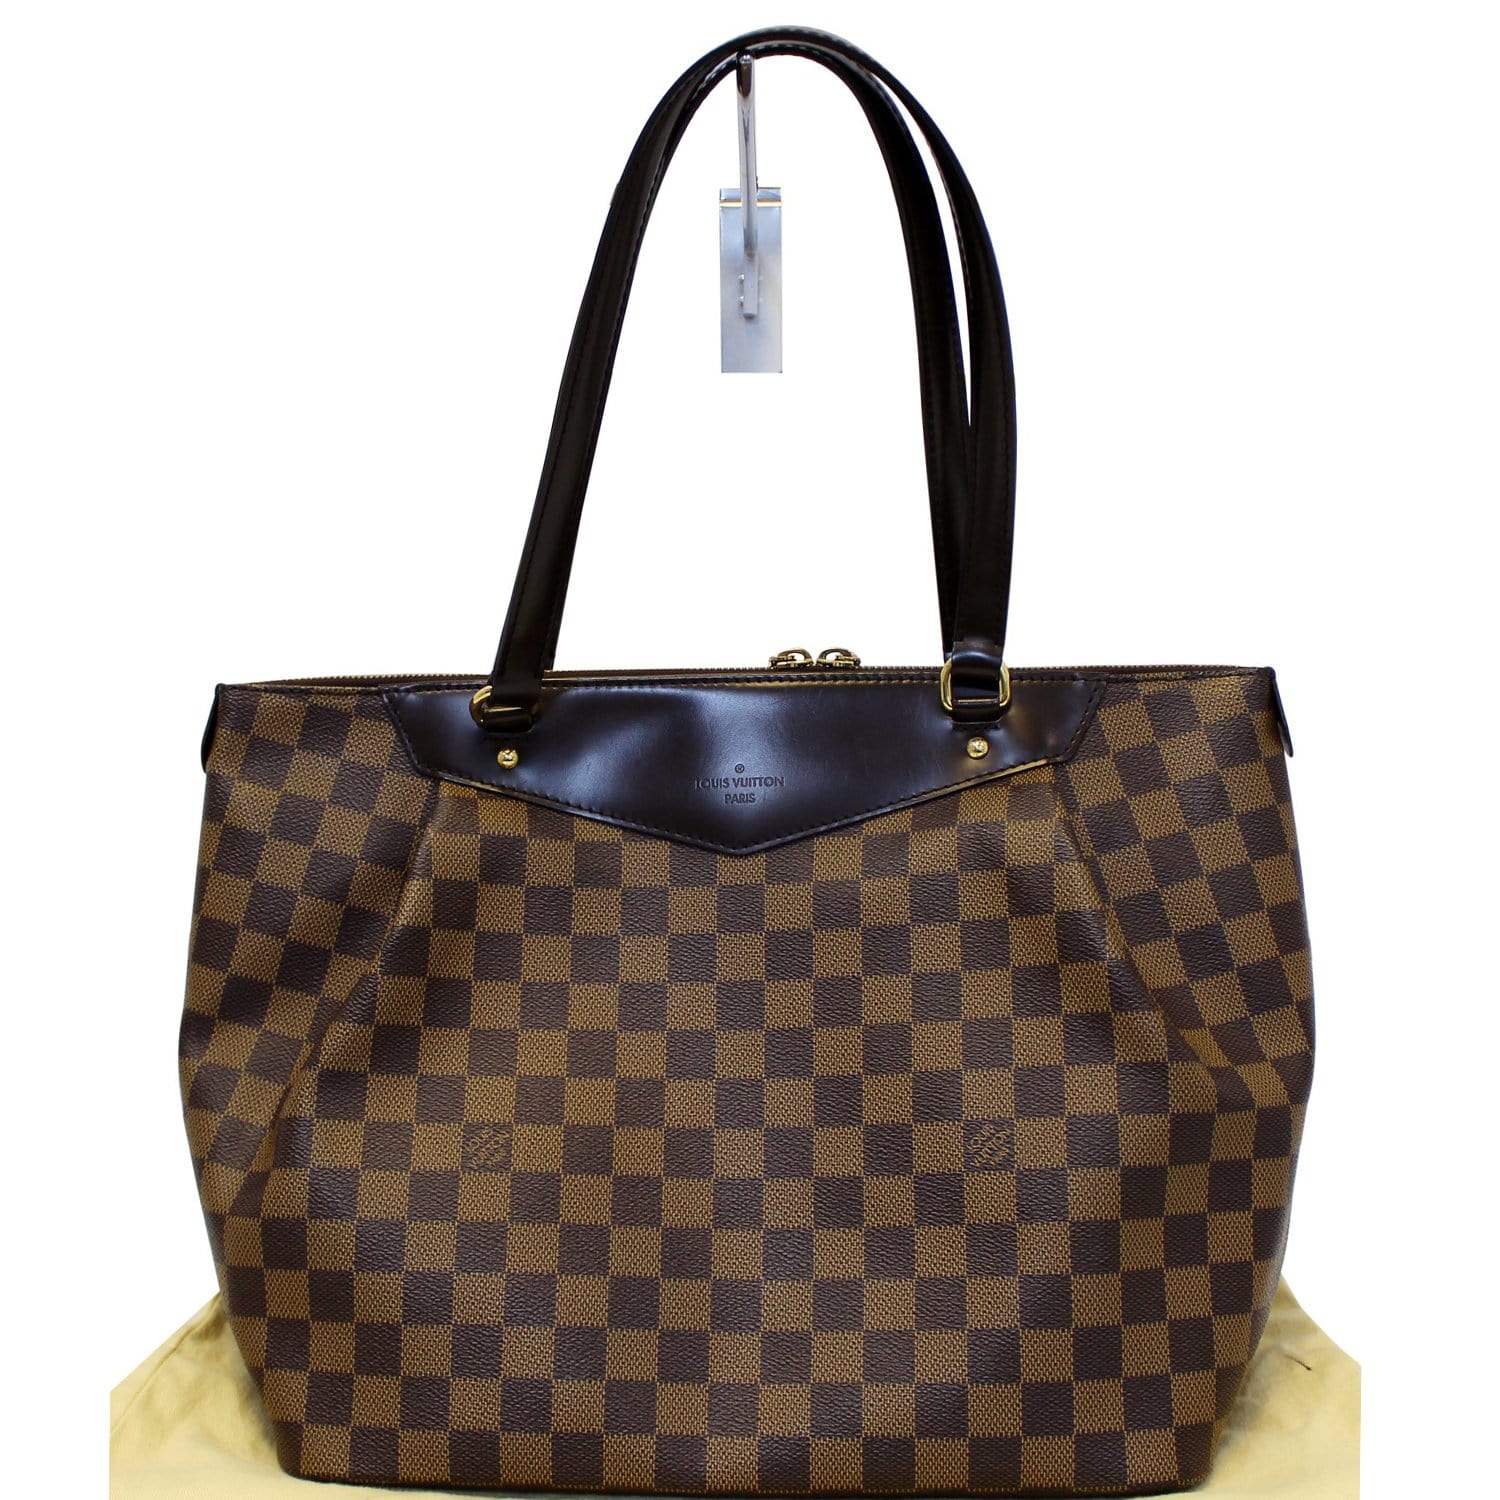 Buy Free Shipping [Used] LOUIS VUITTON Westminster GM Shoulder Bag Damier  Ebene N41103 from Japan - Buy authentic Plus exclusive items from Japan